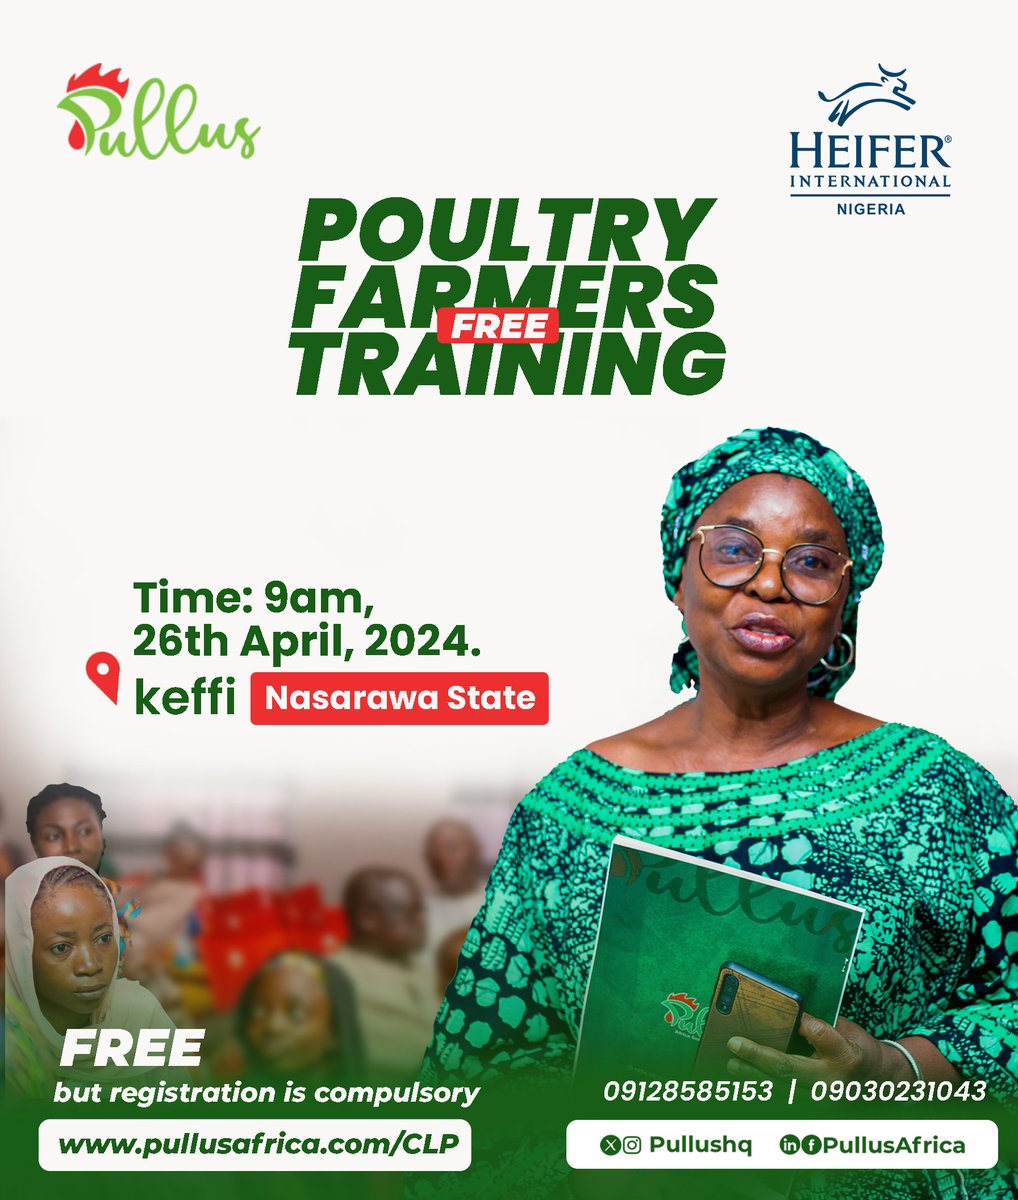 Join Pullus Africa and Heifer Nigeria for Poultry Farmers Training in Keffi, Nasarawa State. Gain vital skills, resources, and networking opportunities. Register free at pullusafrica.com/CLP. #PullusAfrica #HeiferNigeria #FarmersTraining #KeffiNasarawa #RegisterNow